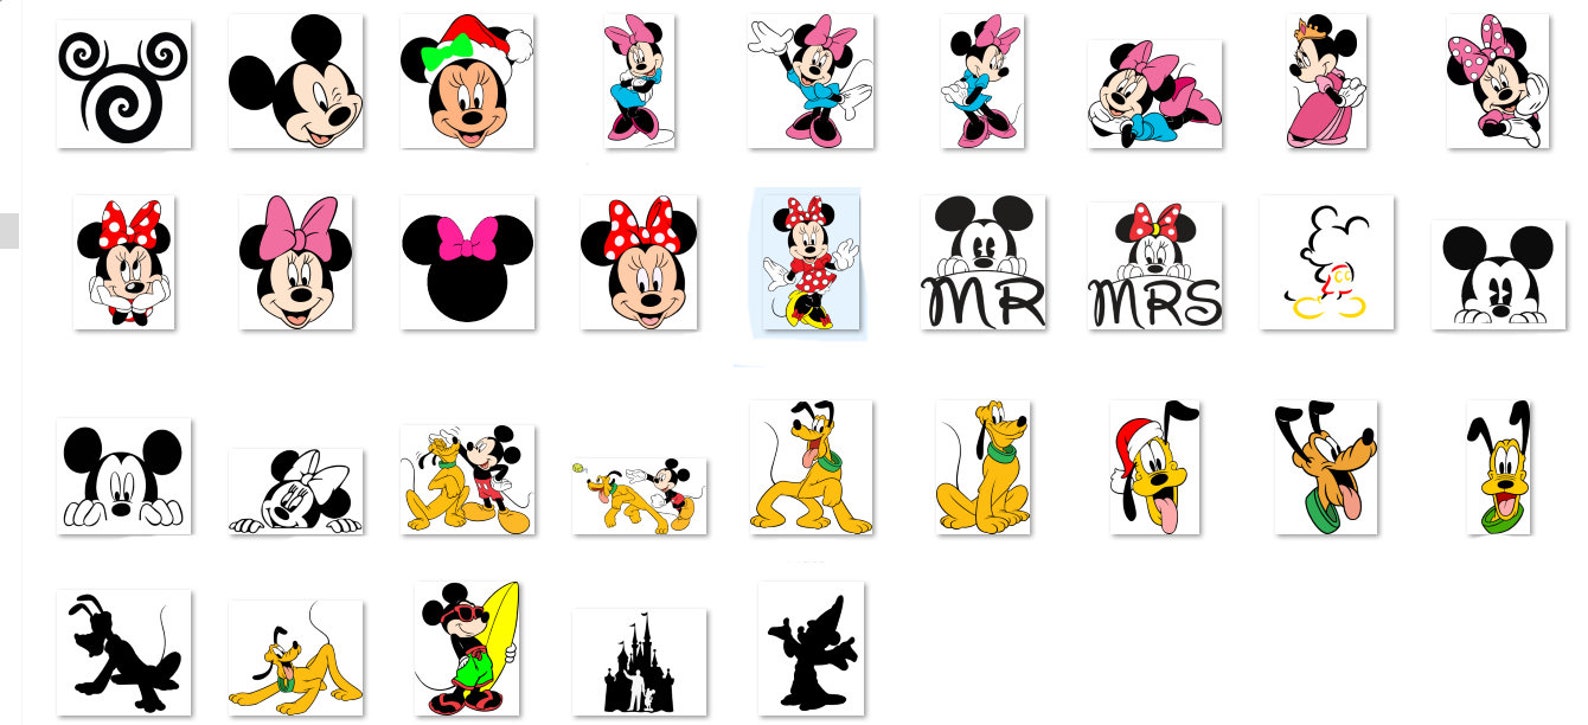 All characters of Mickey Mouse cartoon.